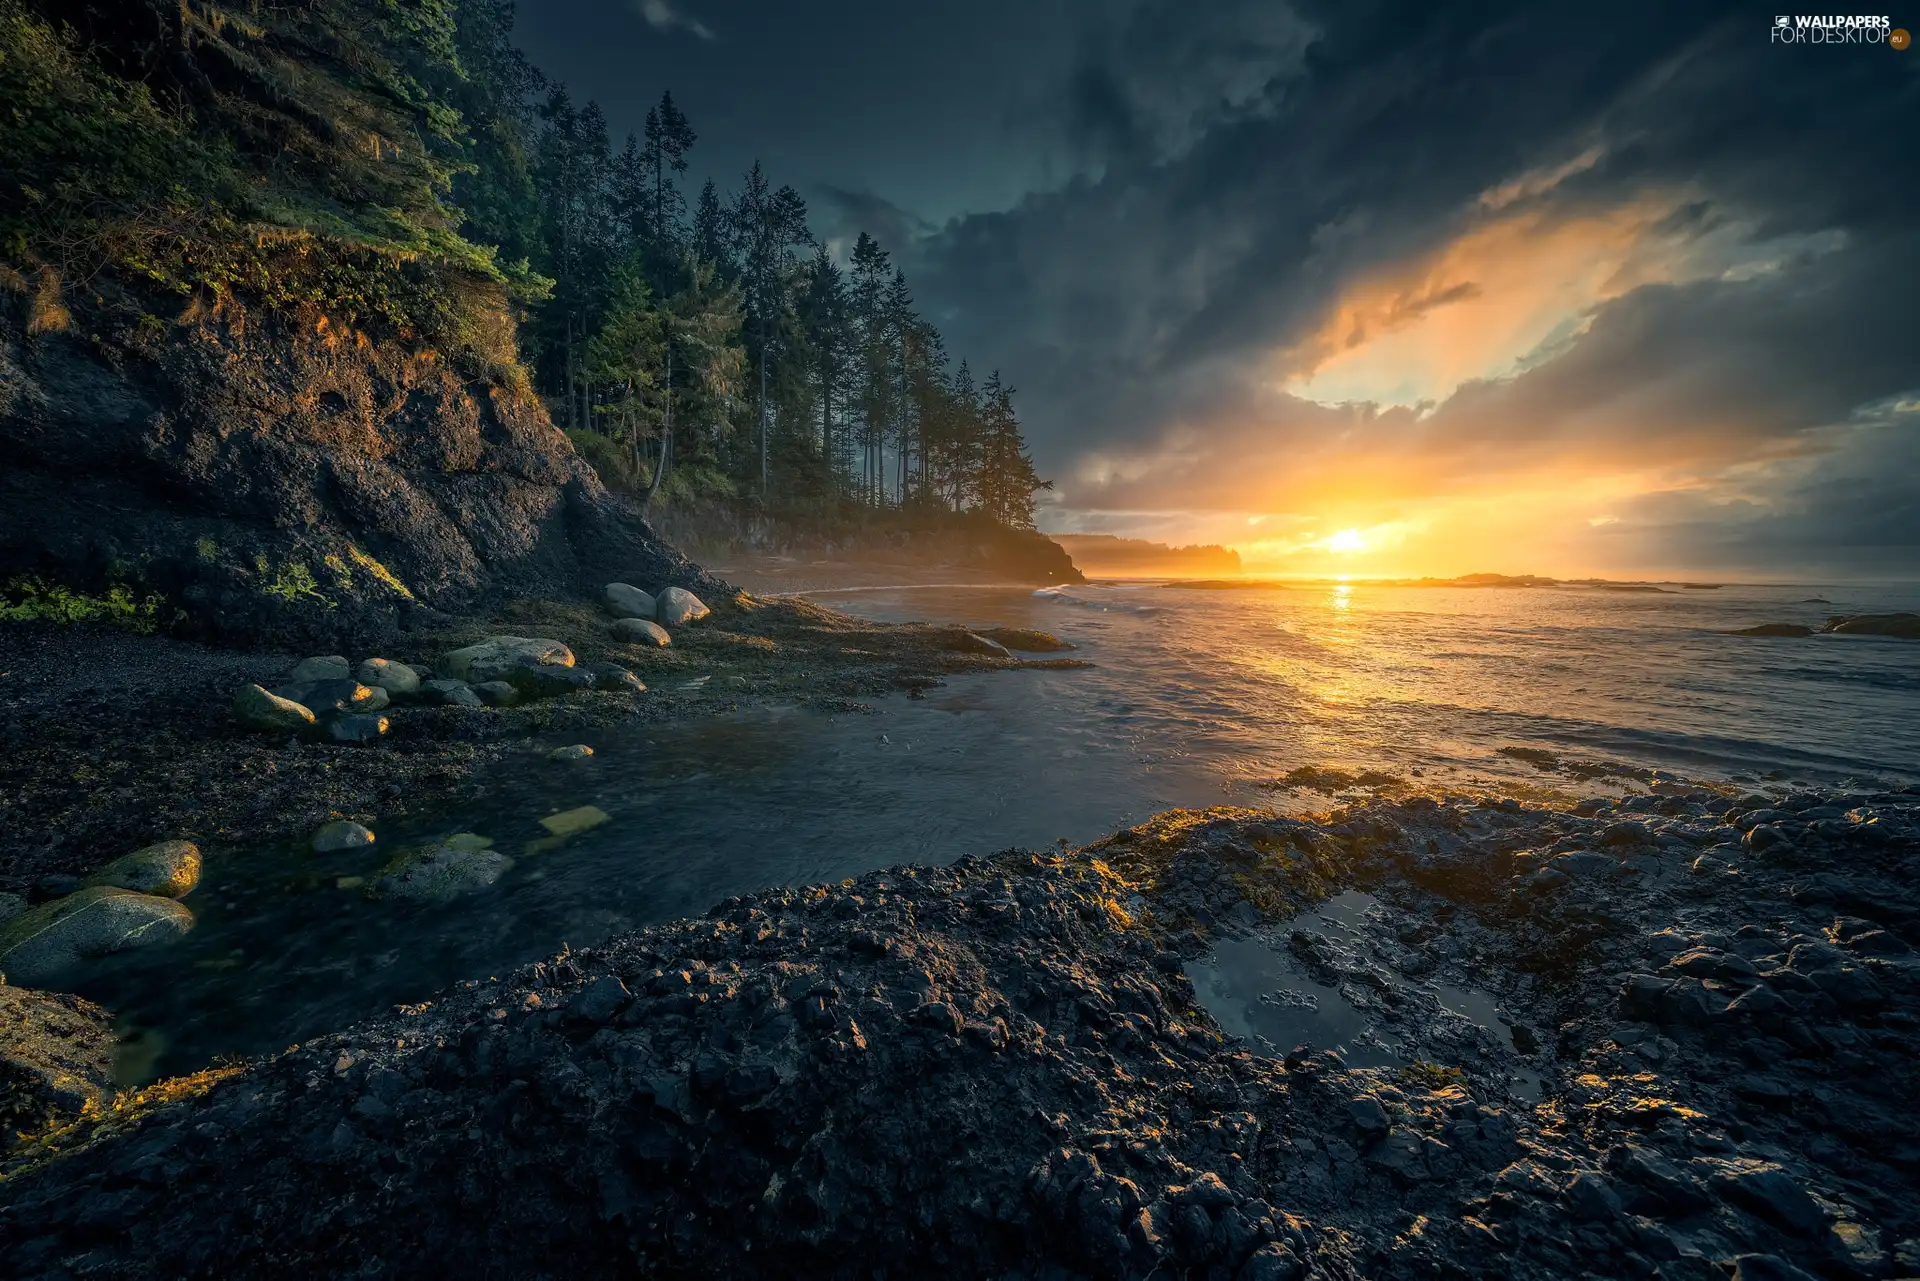 Great Sunsets, Pacific Ocean, scarp, Washington State, trees, sea, Coast, The United States, Olympic National Park, viewes